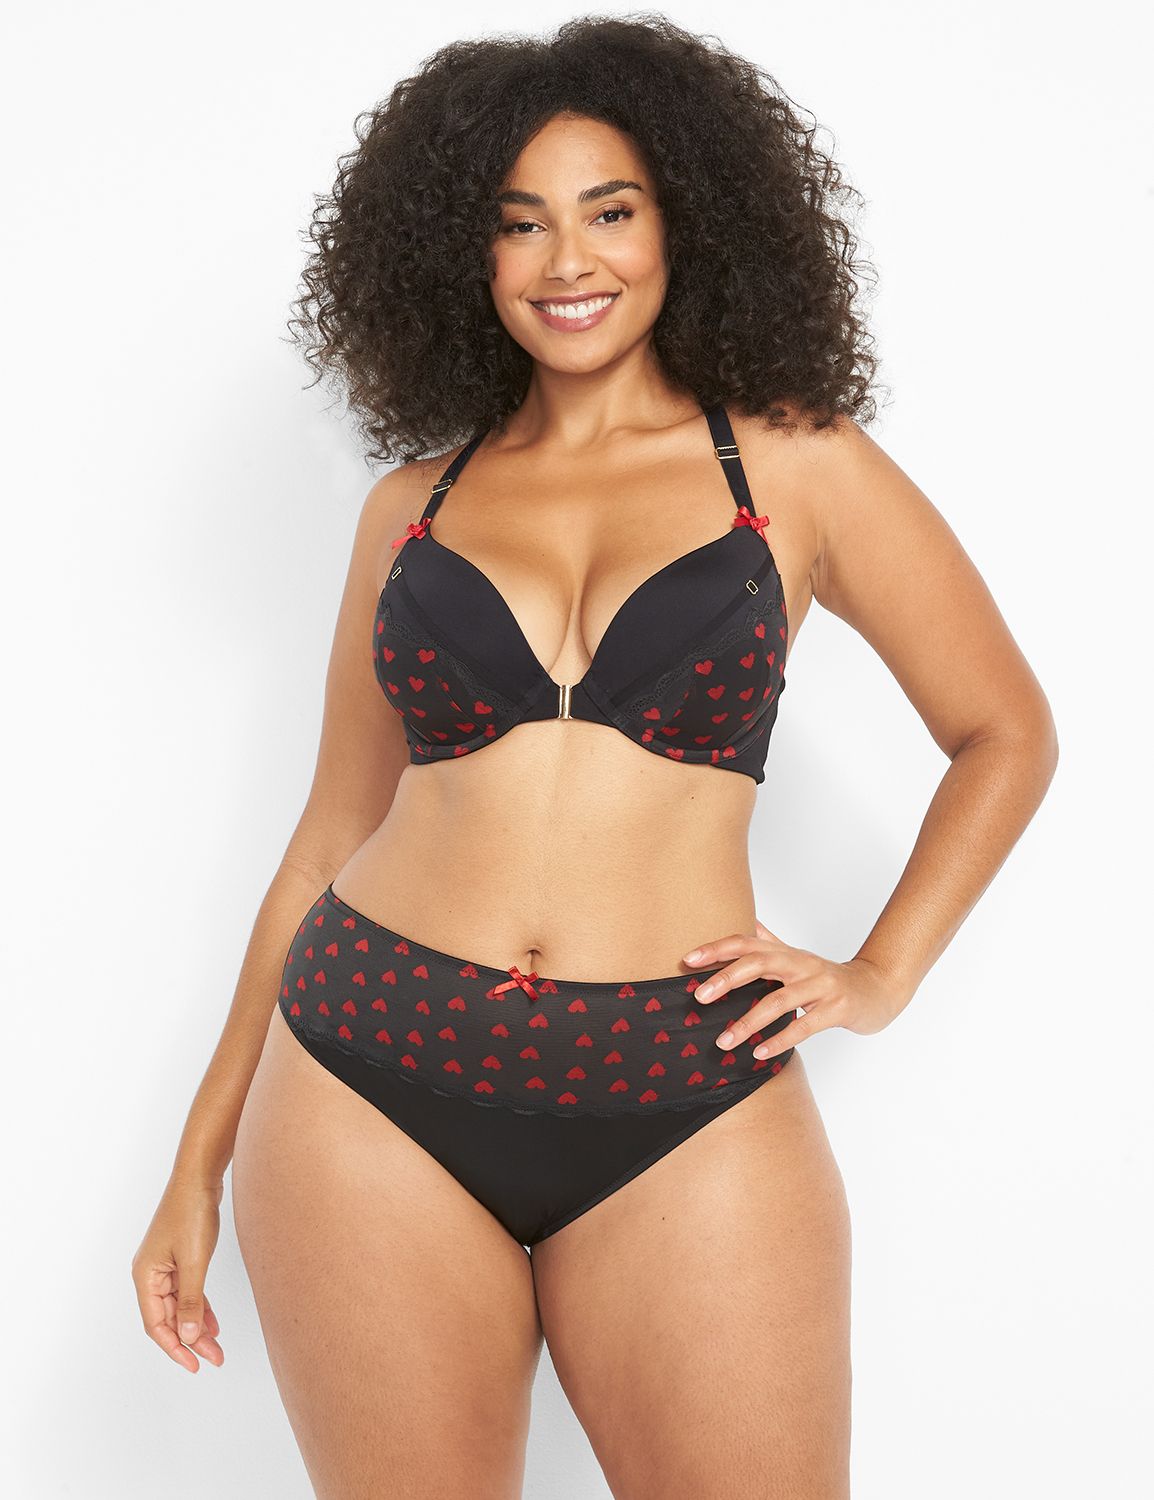 Cacique Lane Bryant Smooth Boost Plunge Plus Size Bra Polka Dot Size 40DD  Multi - $25 - From TheCozy